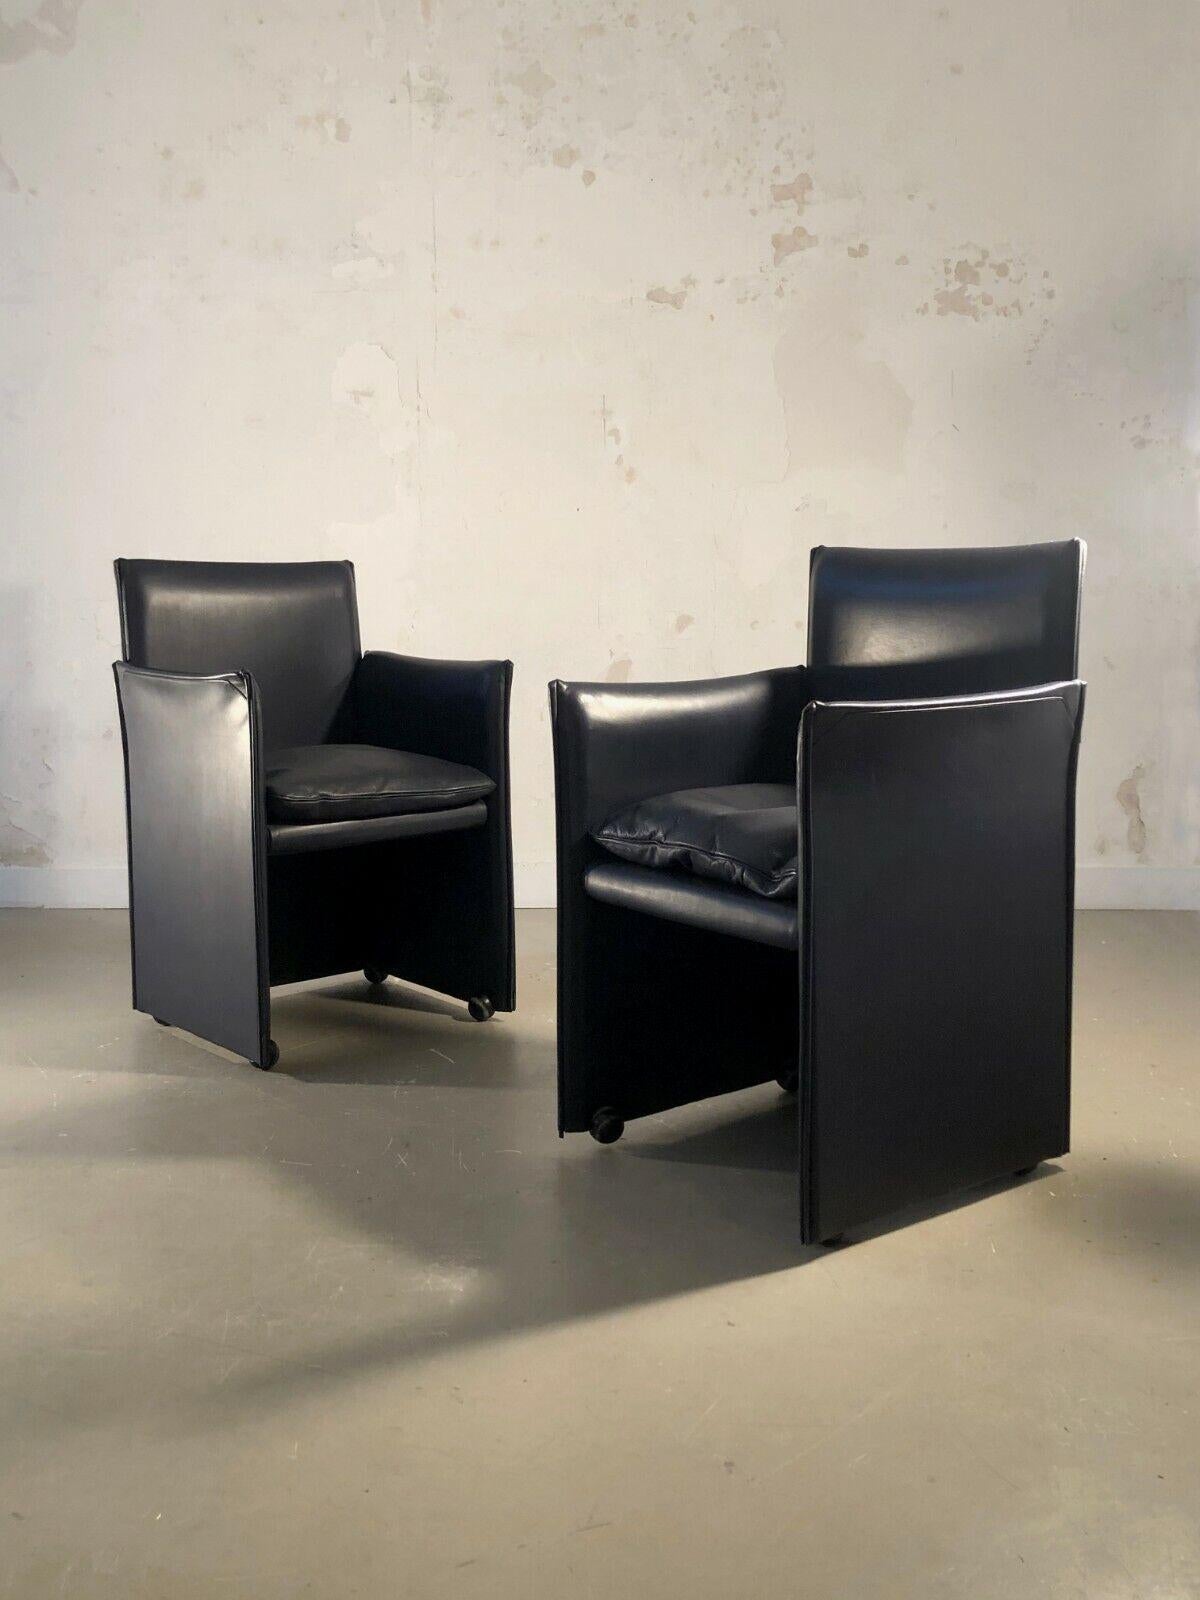 Italian A Pair of Break 401 POST-MODERN CHAIRS by MARIO BELLINI, CASSINA ed. Italy 1970 For Sale